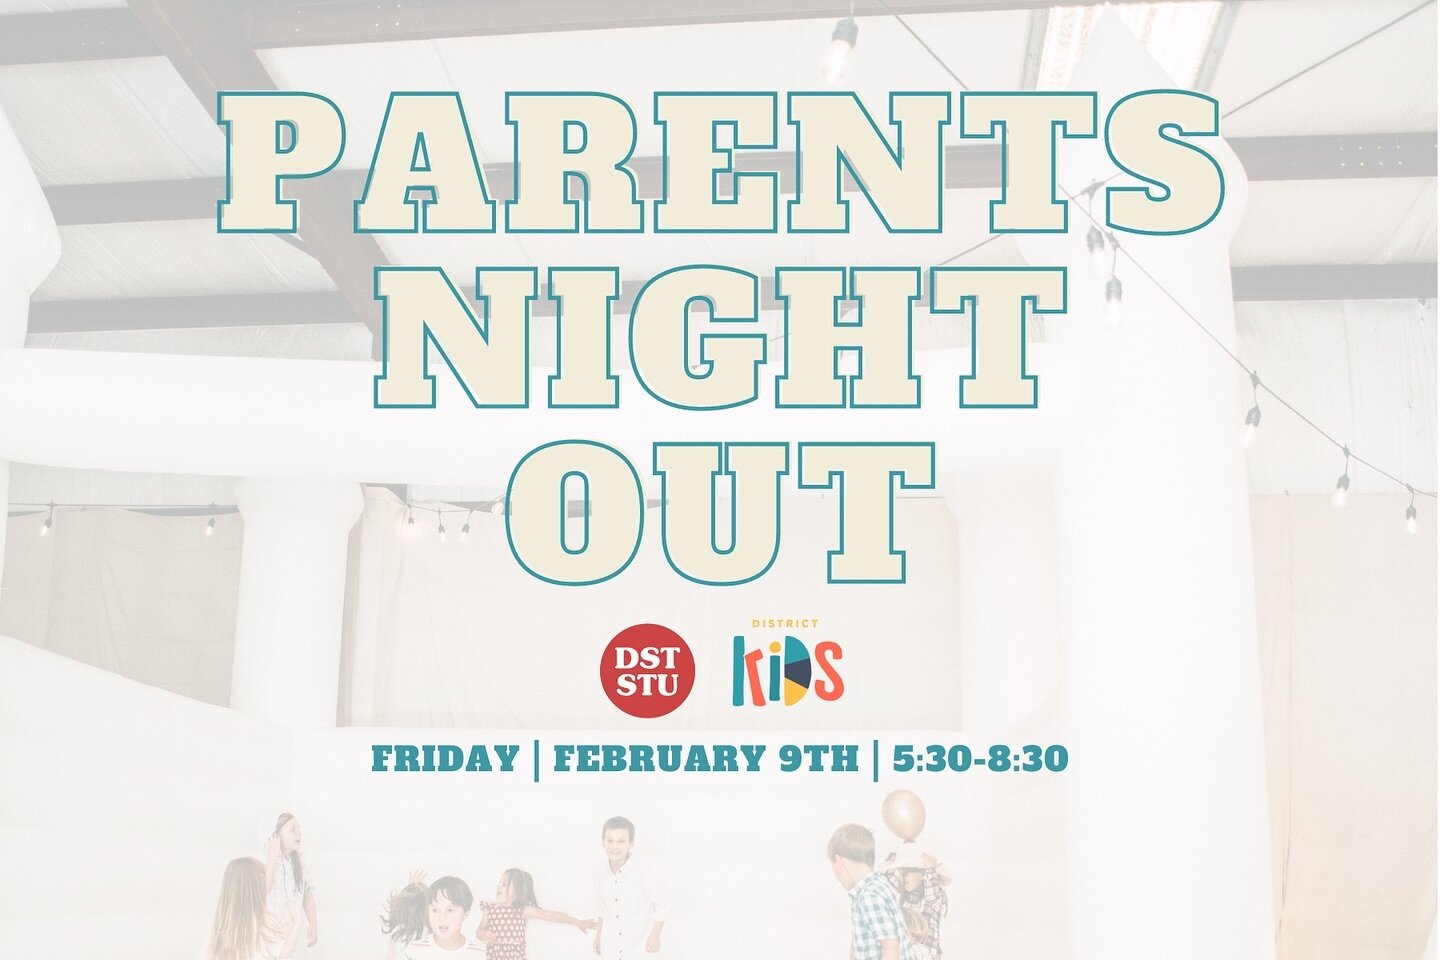 Parents Night Out is this Friday night! Partner with us as we support our District Students going to camp and Panama this summer! For $15 a child, you can drop them off with us and get a night out for you! We will feed your children and provide the f